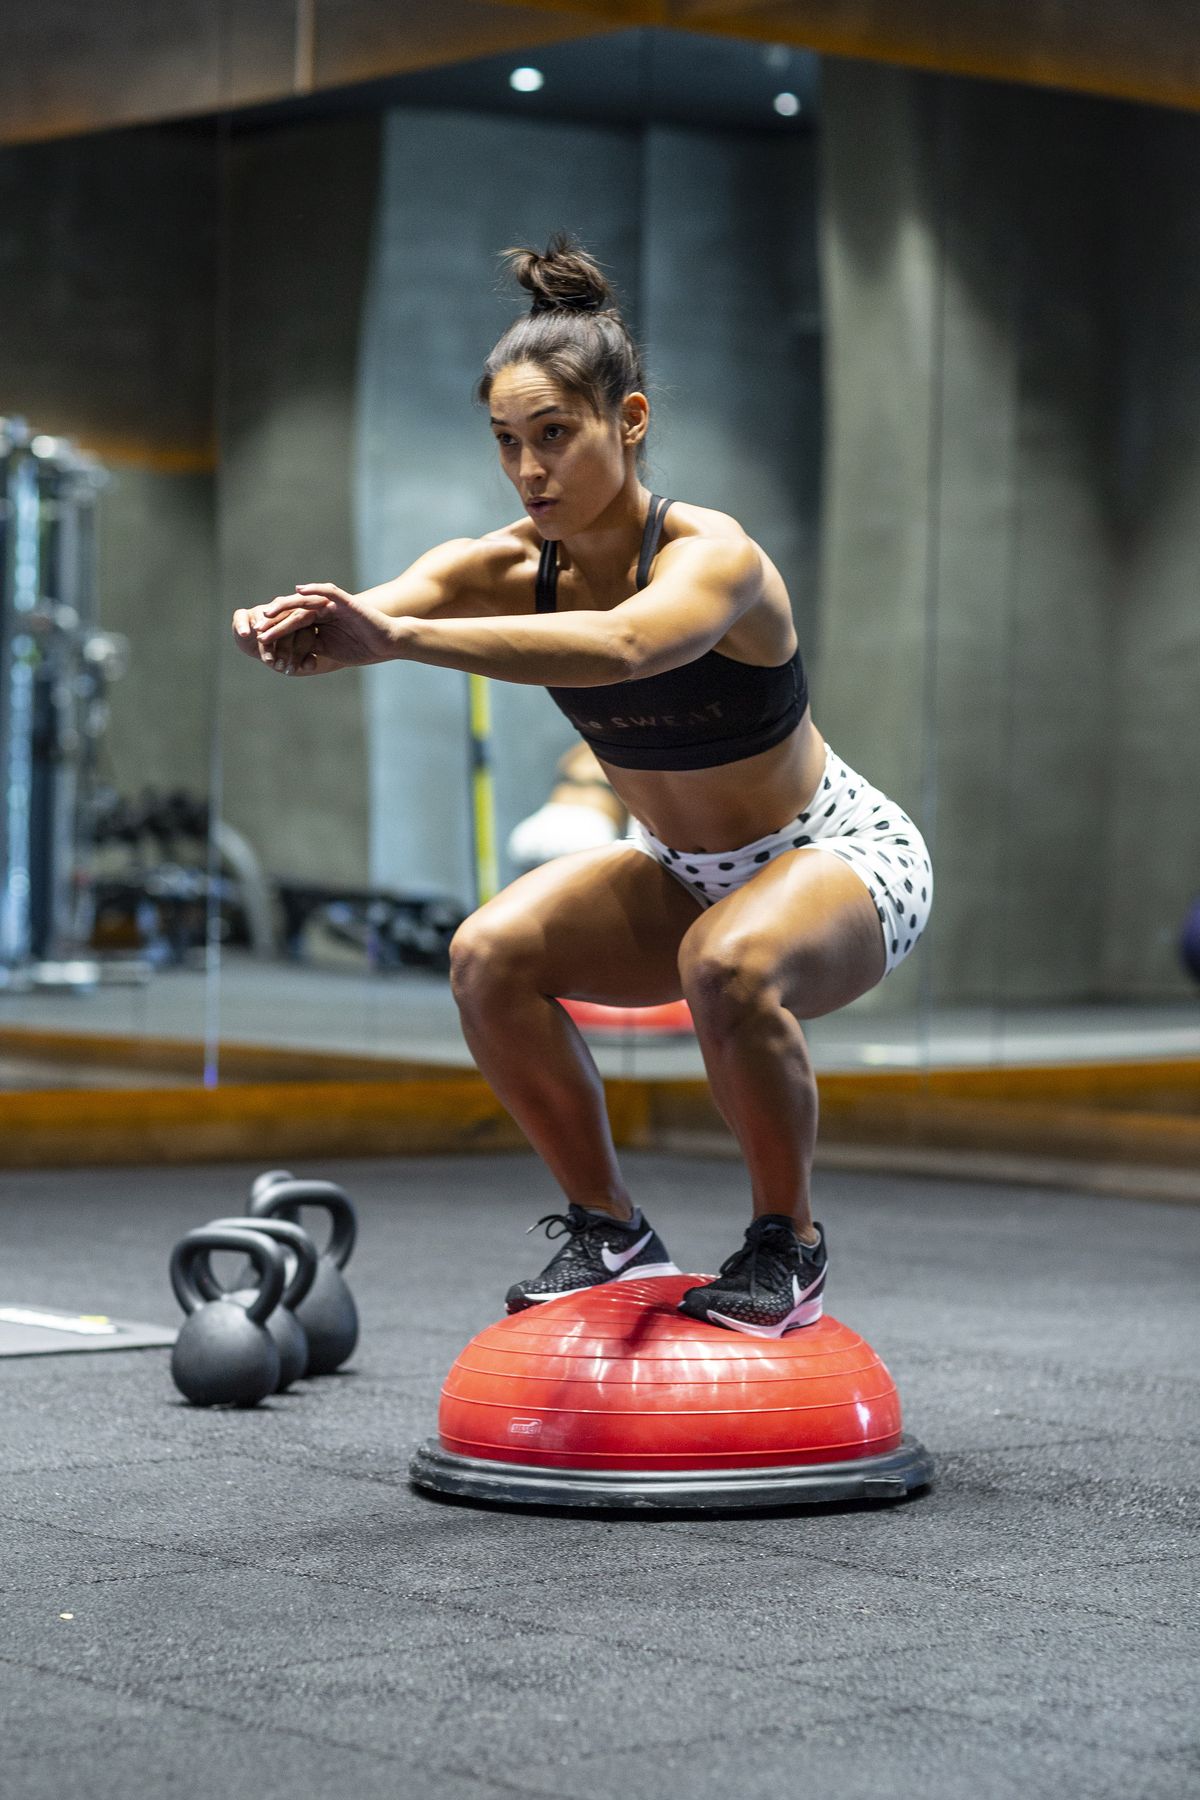 This Bosu Ball Body Stability Workout to Build Balance